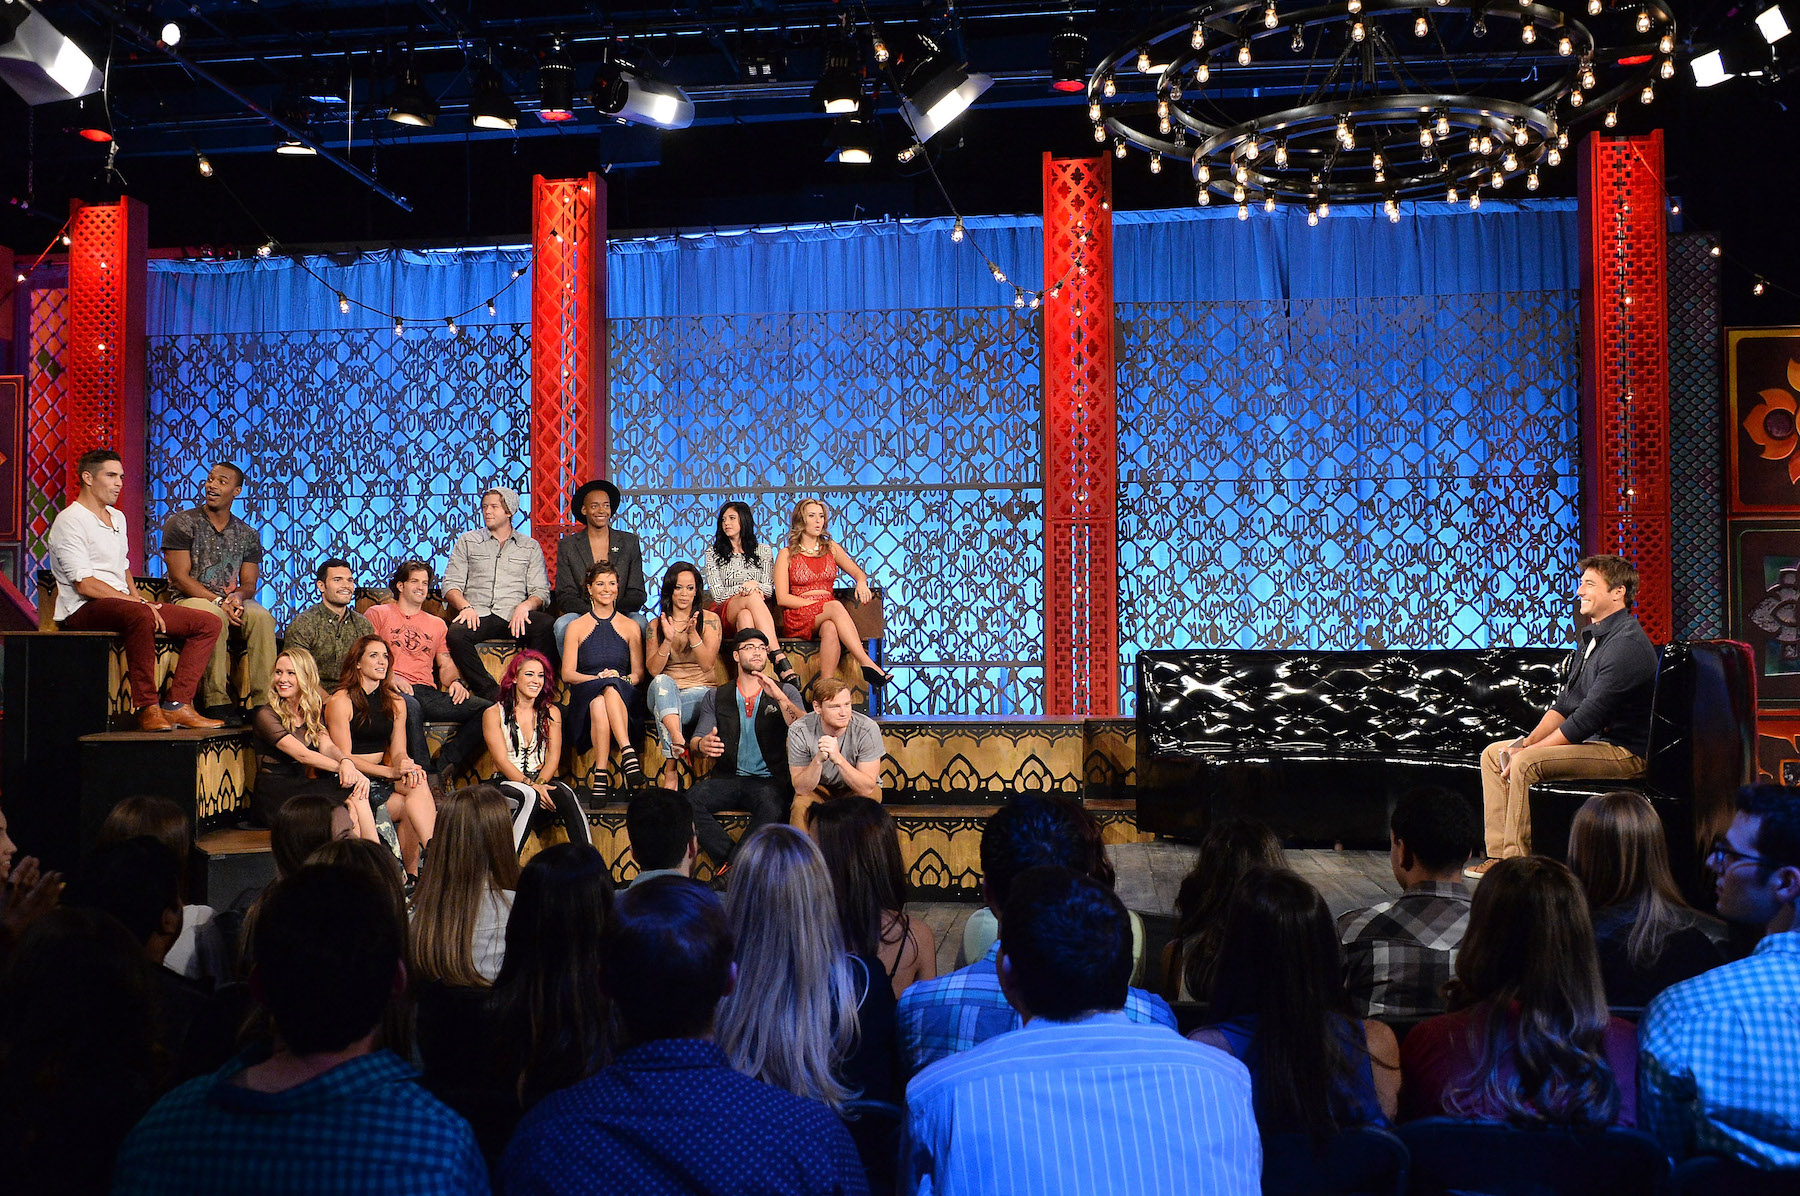 A far-away shot of the contestants sitting together at MTV's 'The Challenge: Rivals II' final episode and reunion party